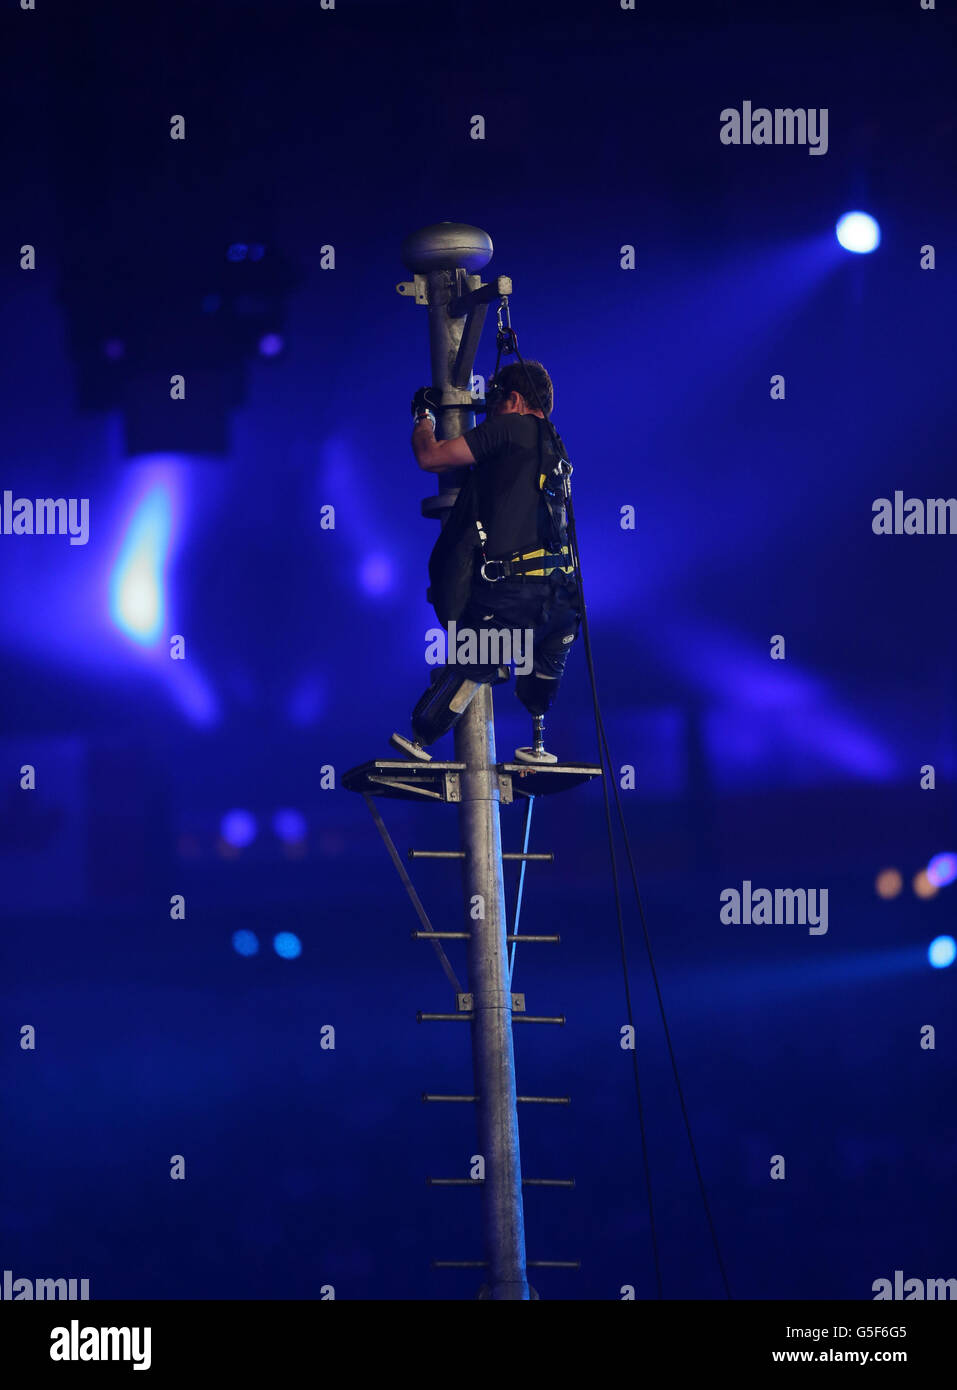 Captain Luke Sinnot climbs a flag pole during the Closing Ceremony for the London Paralympic Games 2012 at the Olympic Stadium, London. Stock Photo